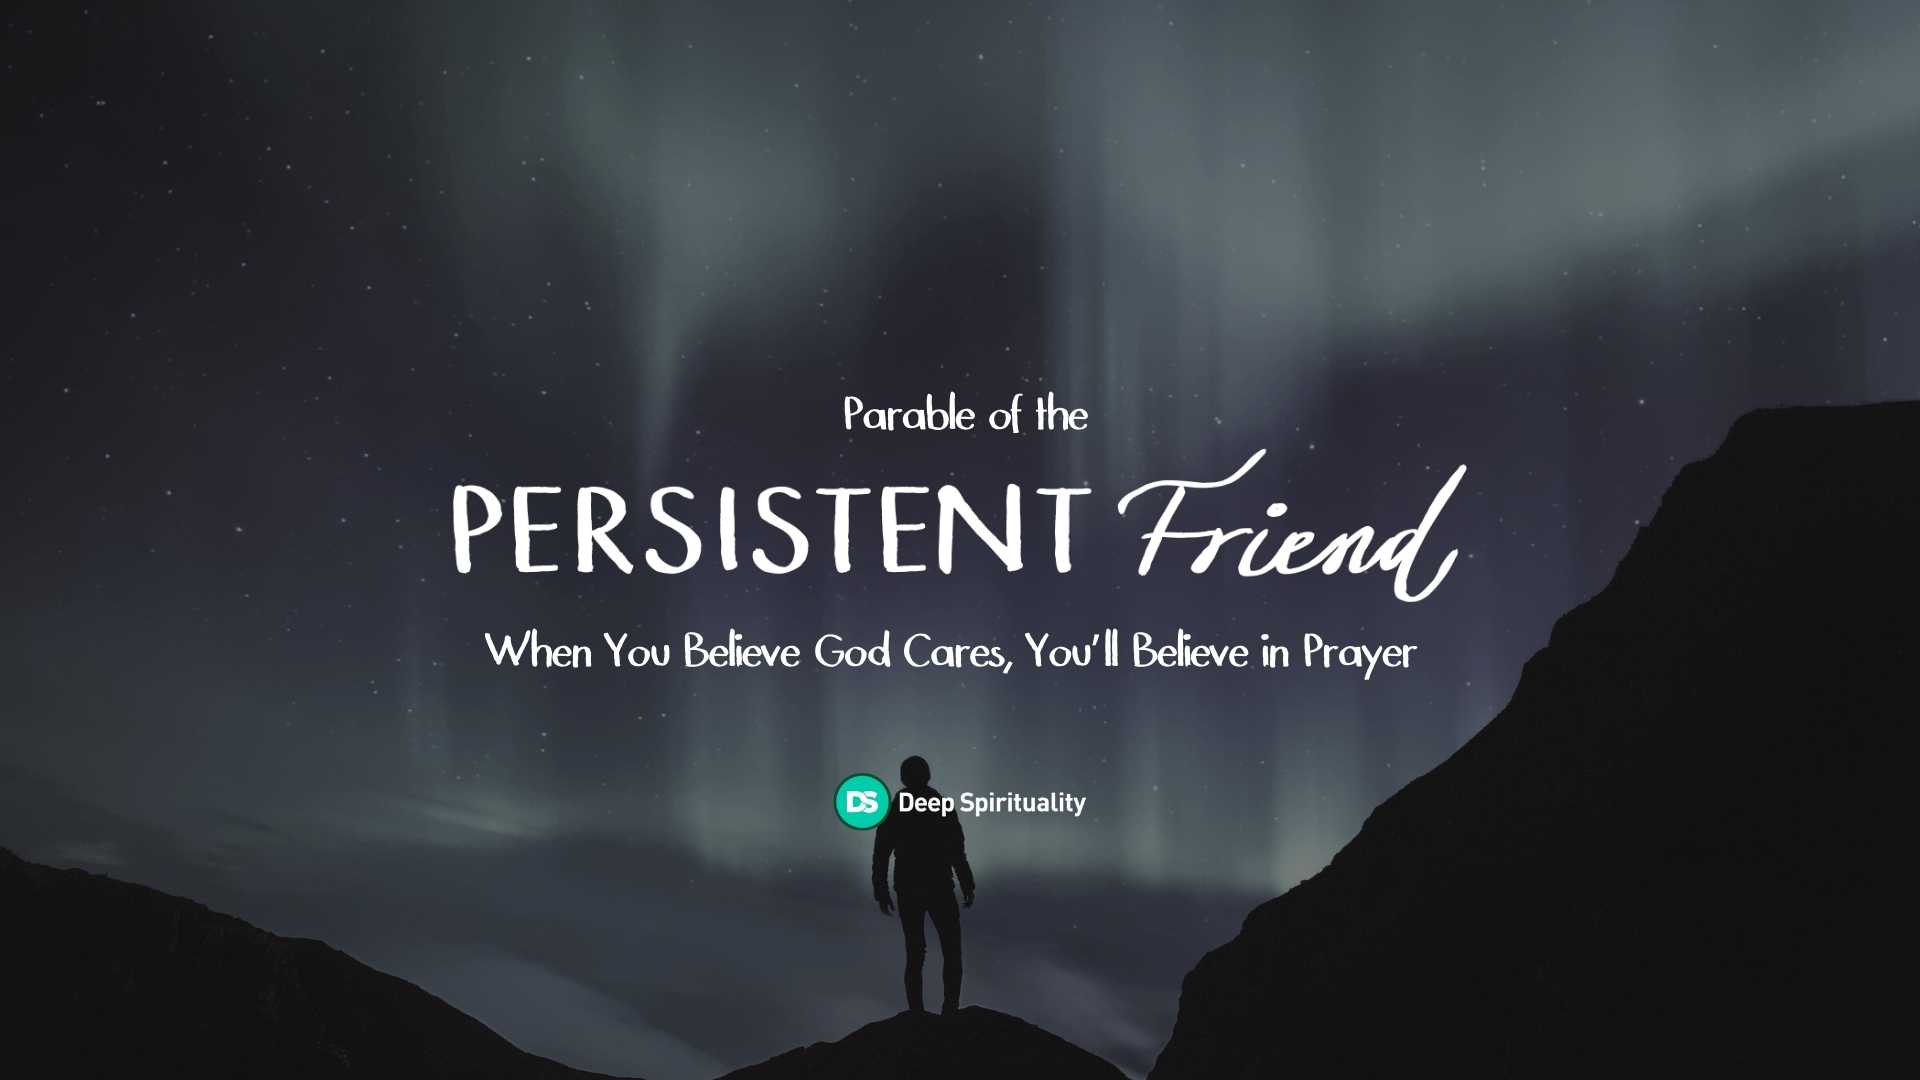 You Can Count On Me: What We Should Learn from the Parable of the Persistent Friend 1